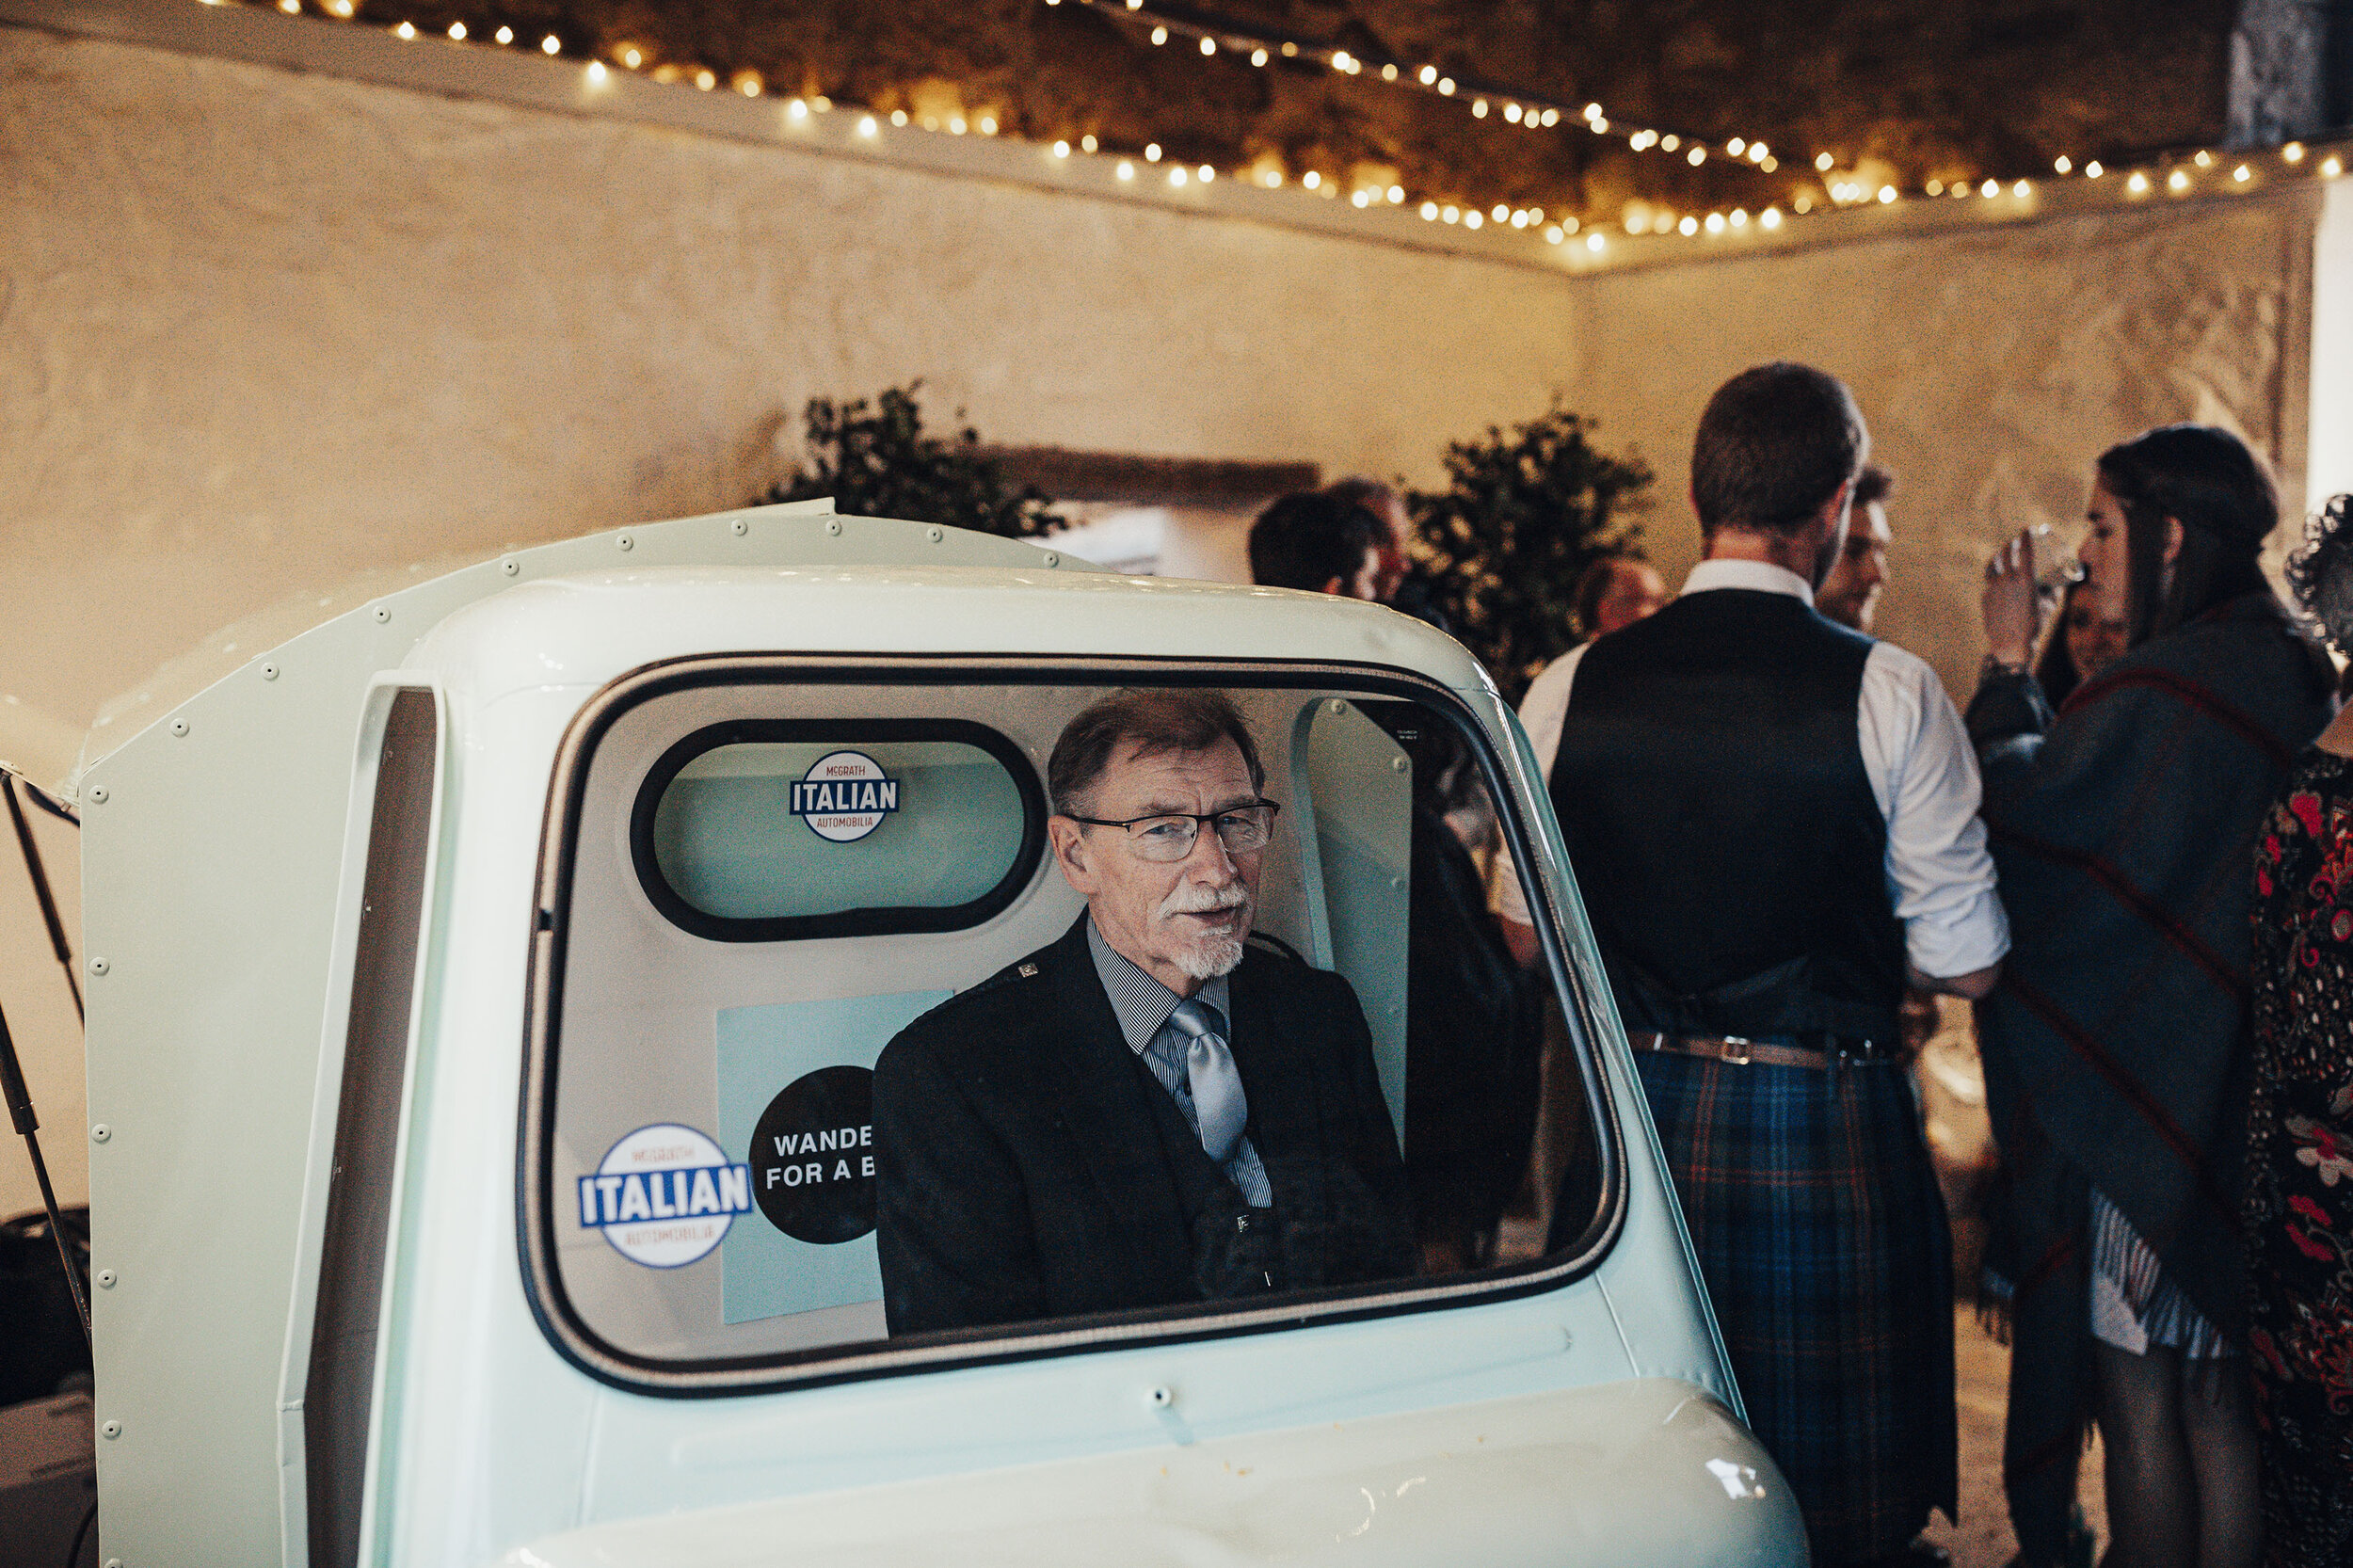 COW_SHED_CRAIL_WEDDING_PJ_PHILLIPS_PHOTOGRAPHY_129.jpg